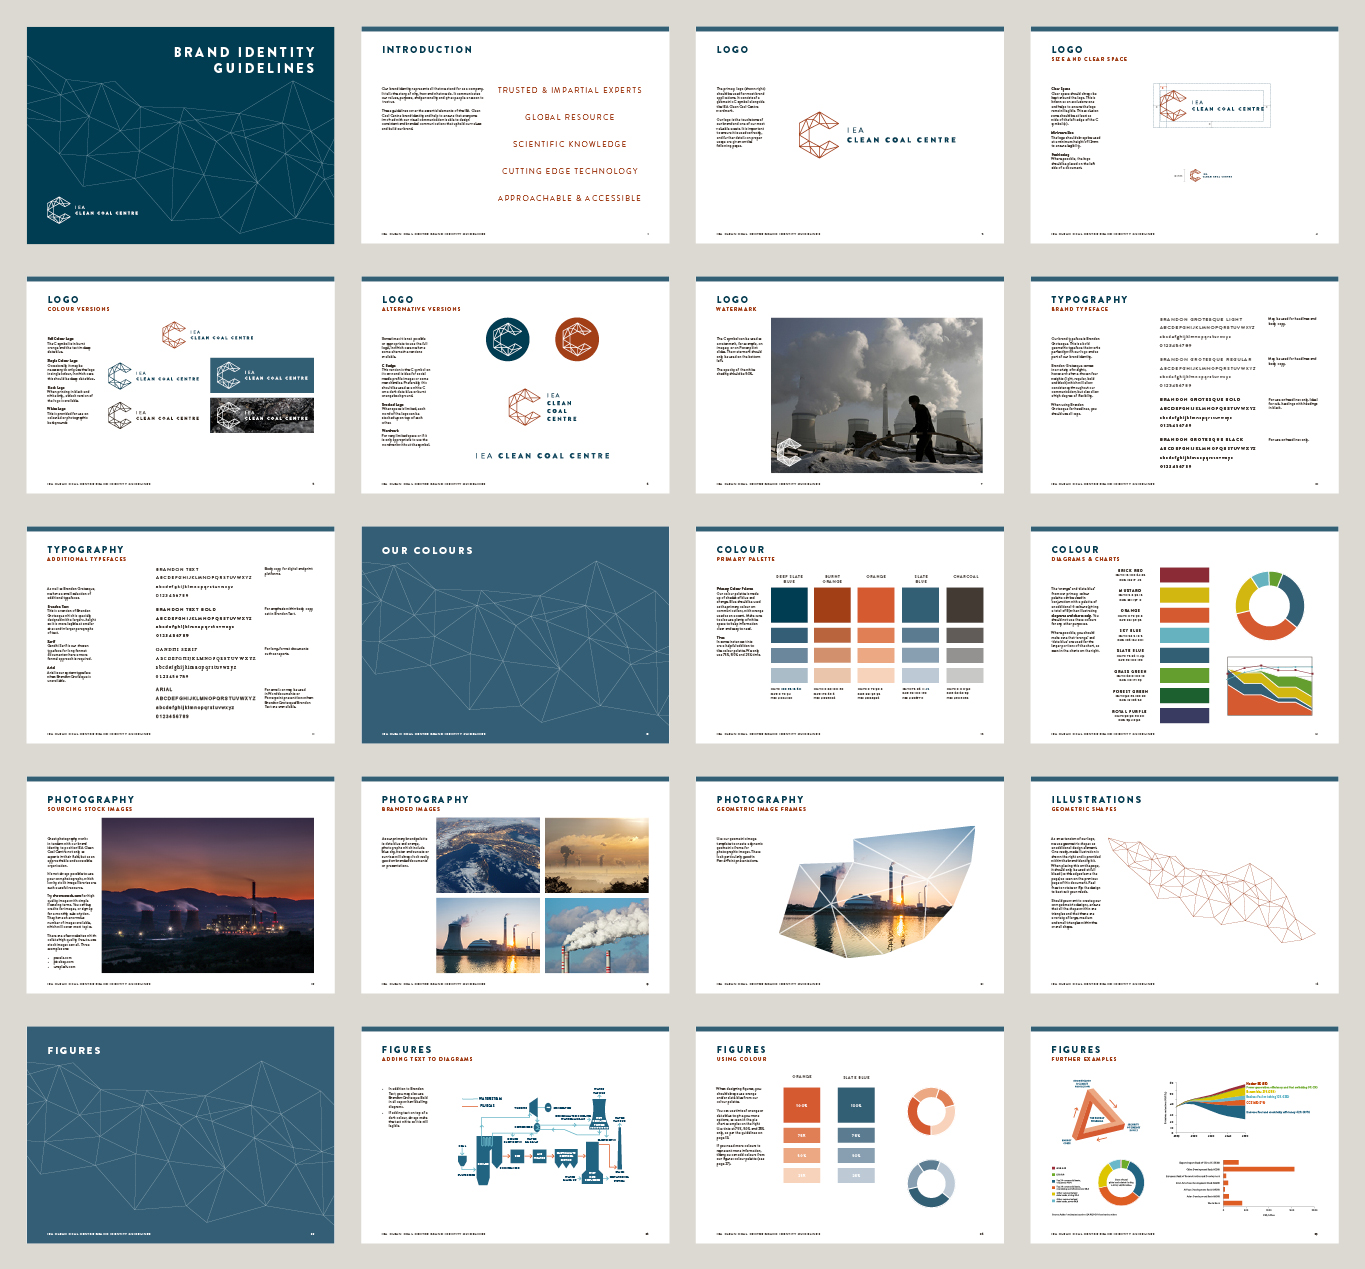 Brand Guidelines for IEA Clean Coal Centre